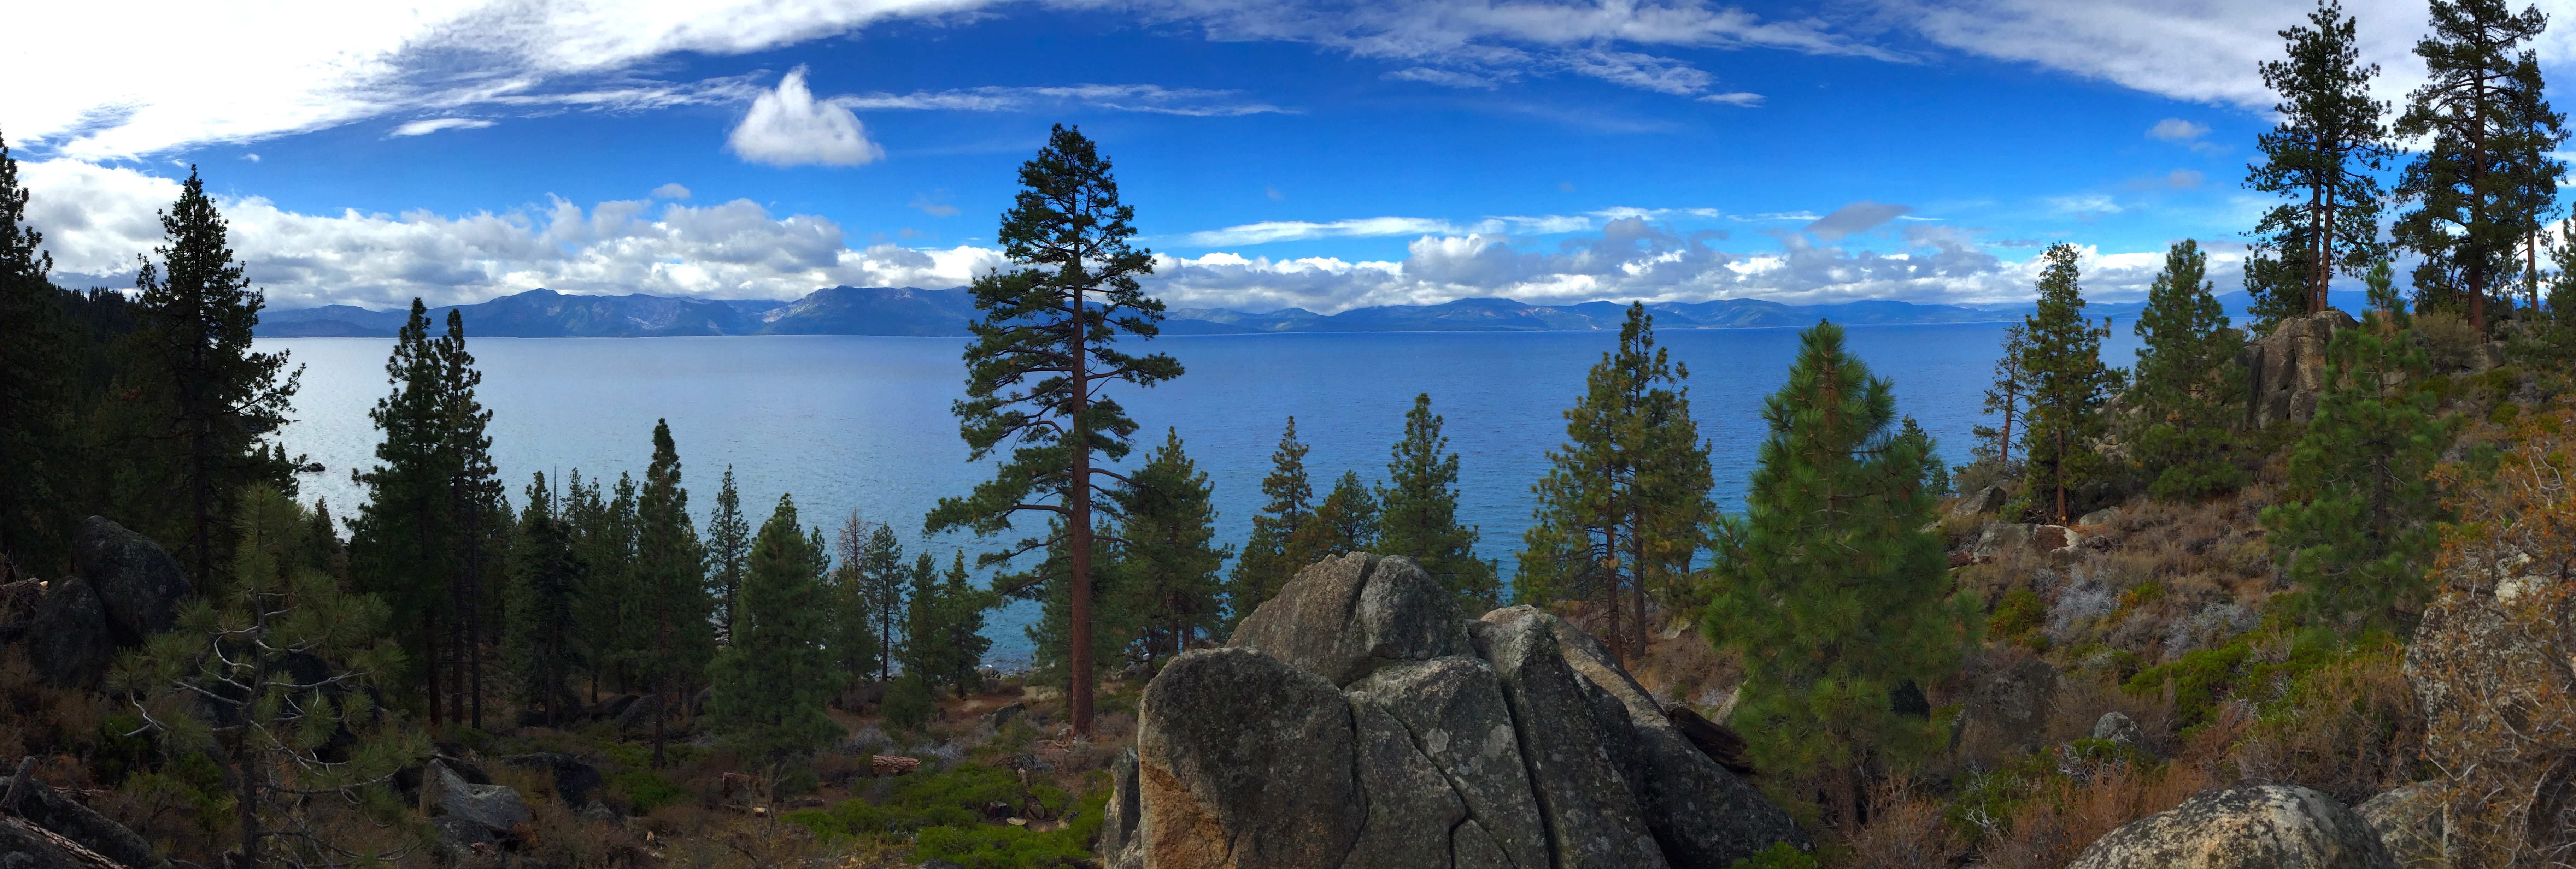 View of Lake Tahoe from Logan Shoals Vista Point--Photo credit Anne Roos